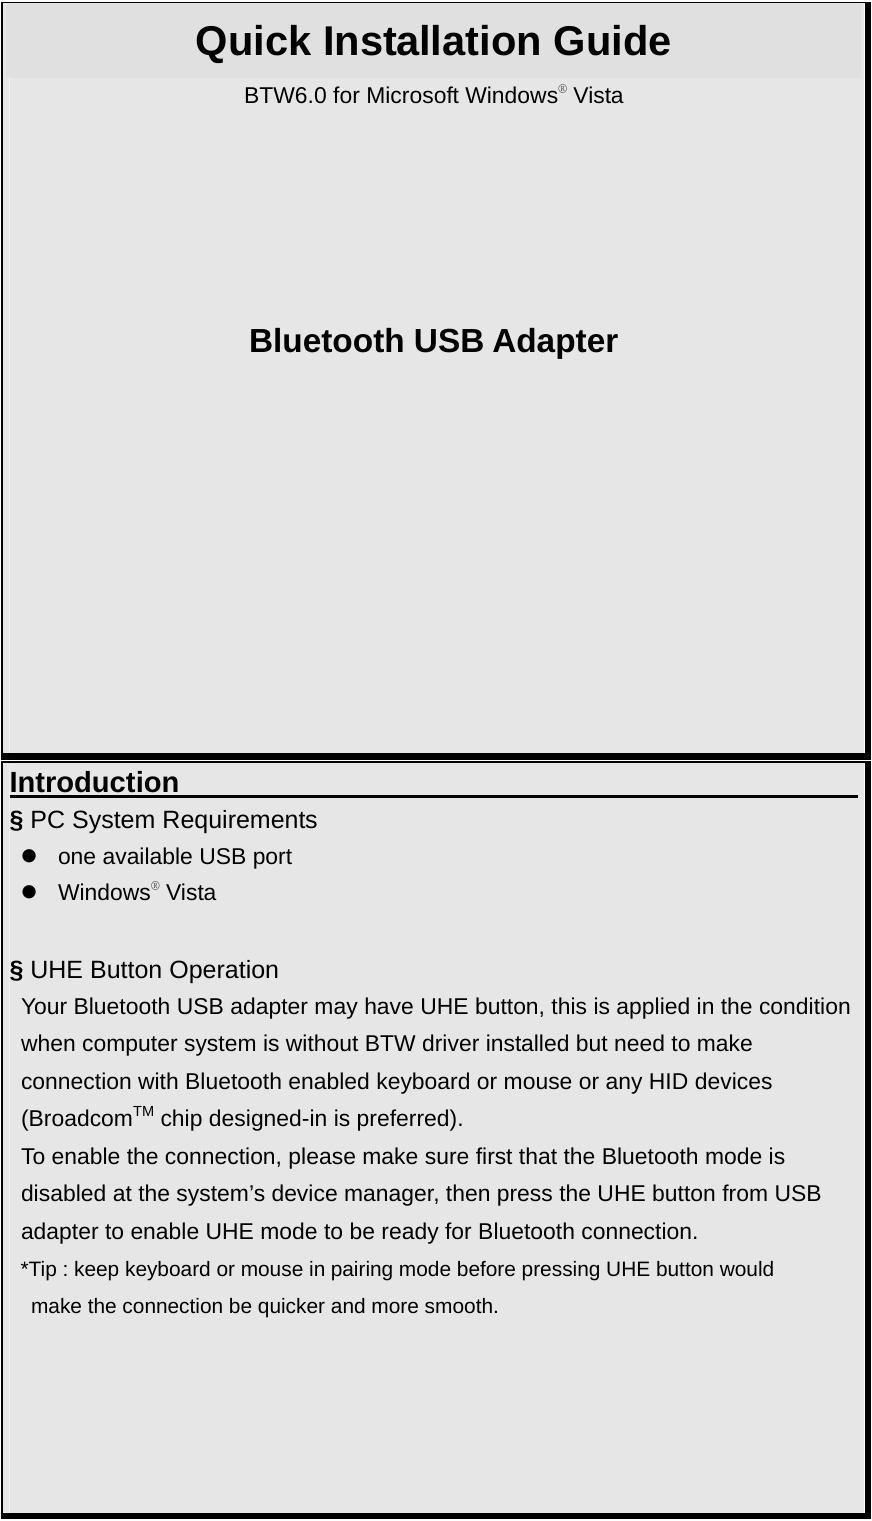 Quick Installation Guide BTW6.0 for Microsoft Windows® Vista      Bluetooth USB Adapter          Introduction                                              § PC System Requirements z  one available USB port z Windows® Vista  § UHE Button Operation   Your Bluetooth USB adapter may have UHE button, this is applied in the condition when computer system is without BTW driver installed but need to make   connection with Bluetooth enabled keyboard or mouse or any HID devices   (BroadcomTM chip designed-in is preferred). To enable the connection, please make sure first that the Bluetooth mode is   disabled at the system’s device manager, then press the UHE button from USB   adapter to enable UHE mode to be ready for Bluetooth connection. *Tip : keep keyboard or mouse in pairing mode before pressing UHE button would   make the connection be quicker and more smooth.      